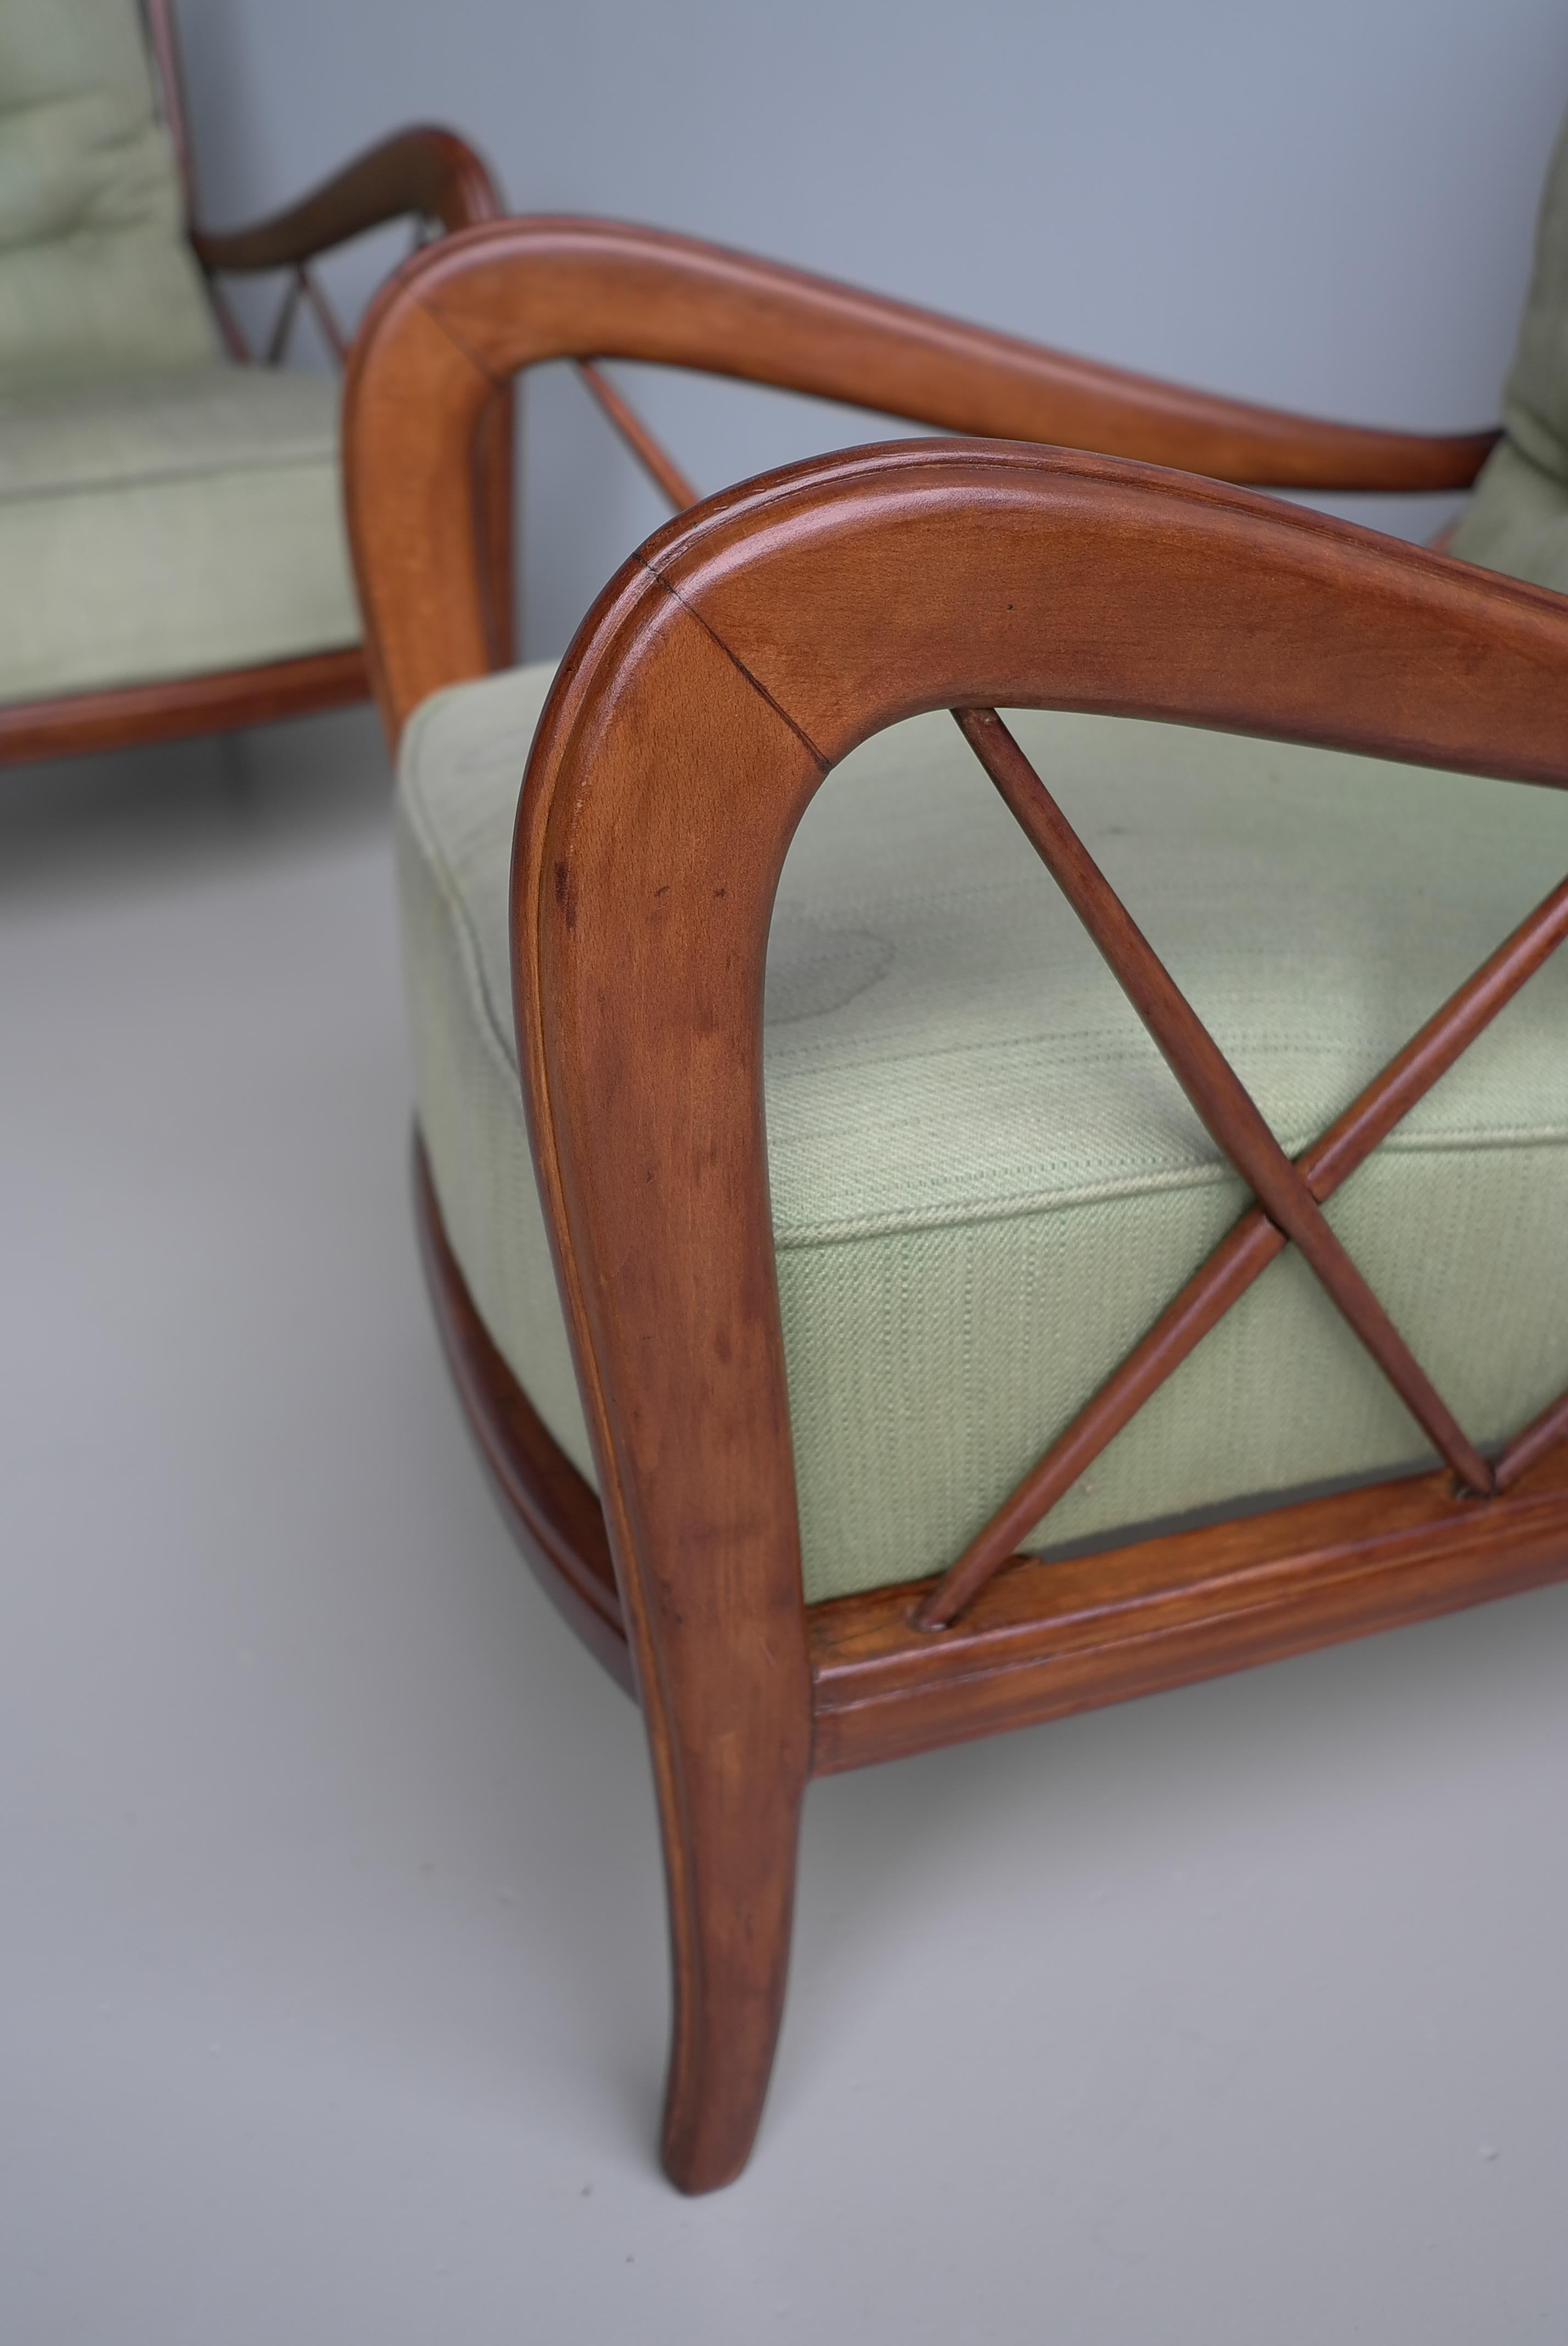 Walnut Wooden Lounge Chairs attr Paolo Buffa, Milan Italy 1940's For Sale 11